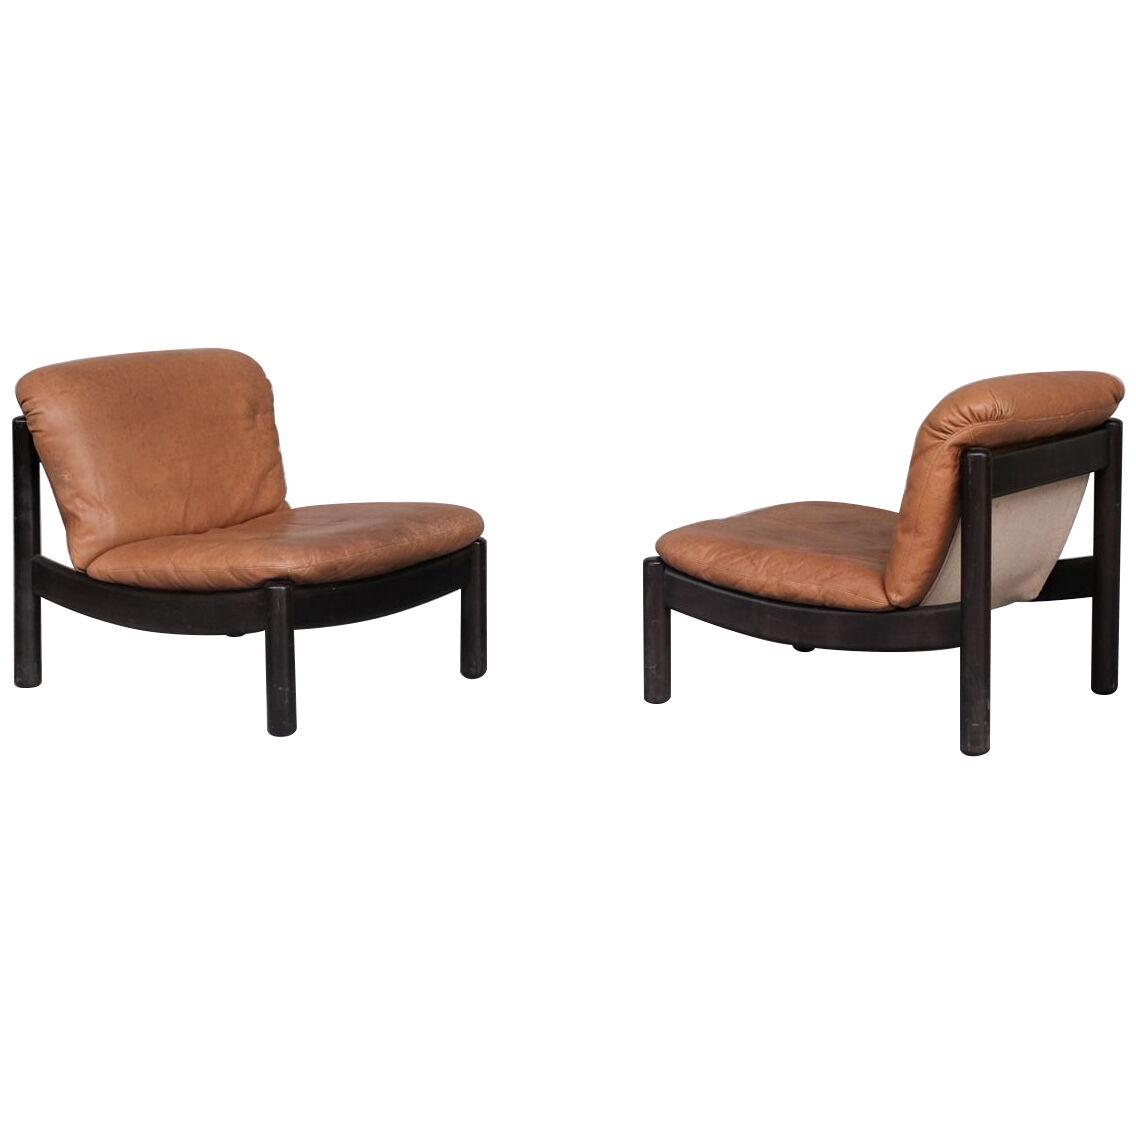 Pair of German Leather Easy Lounge Chairs